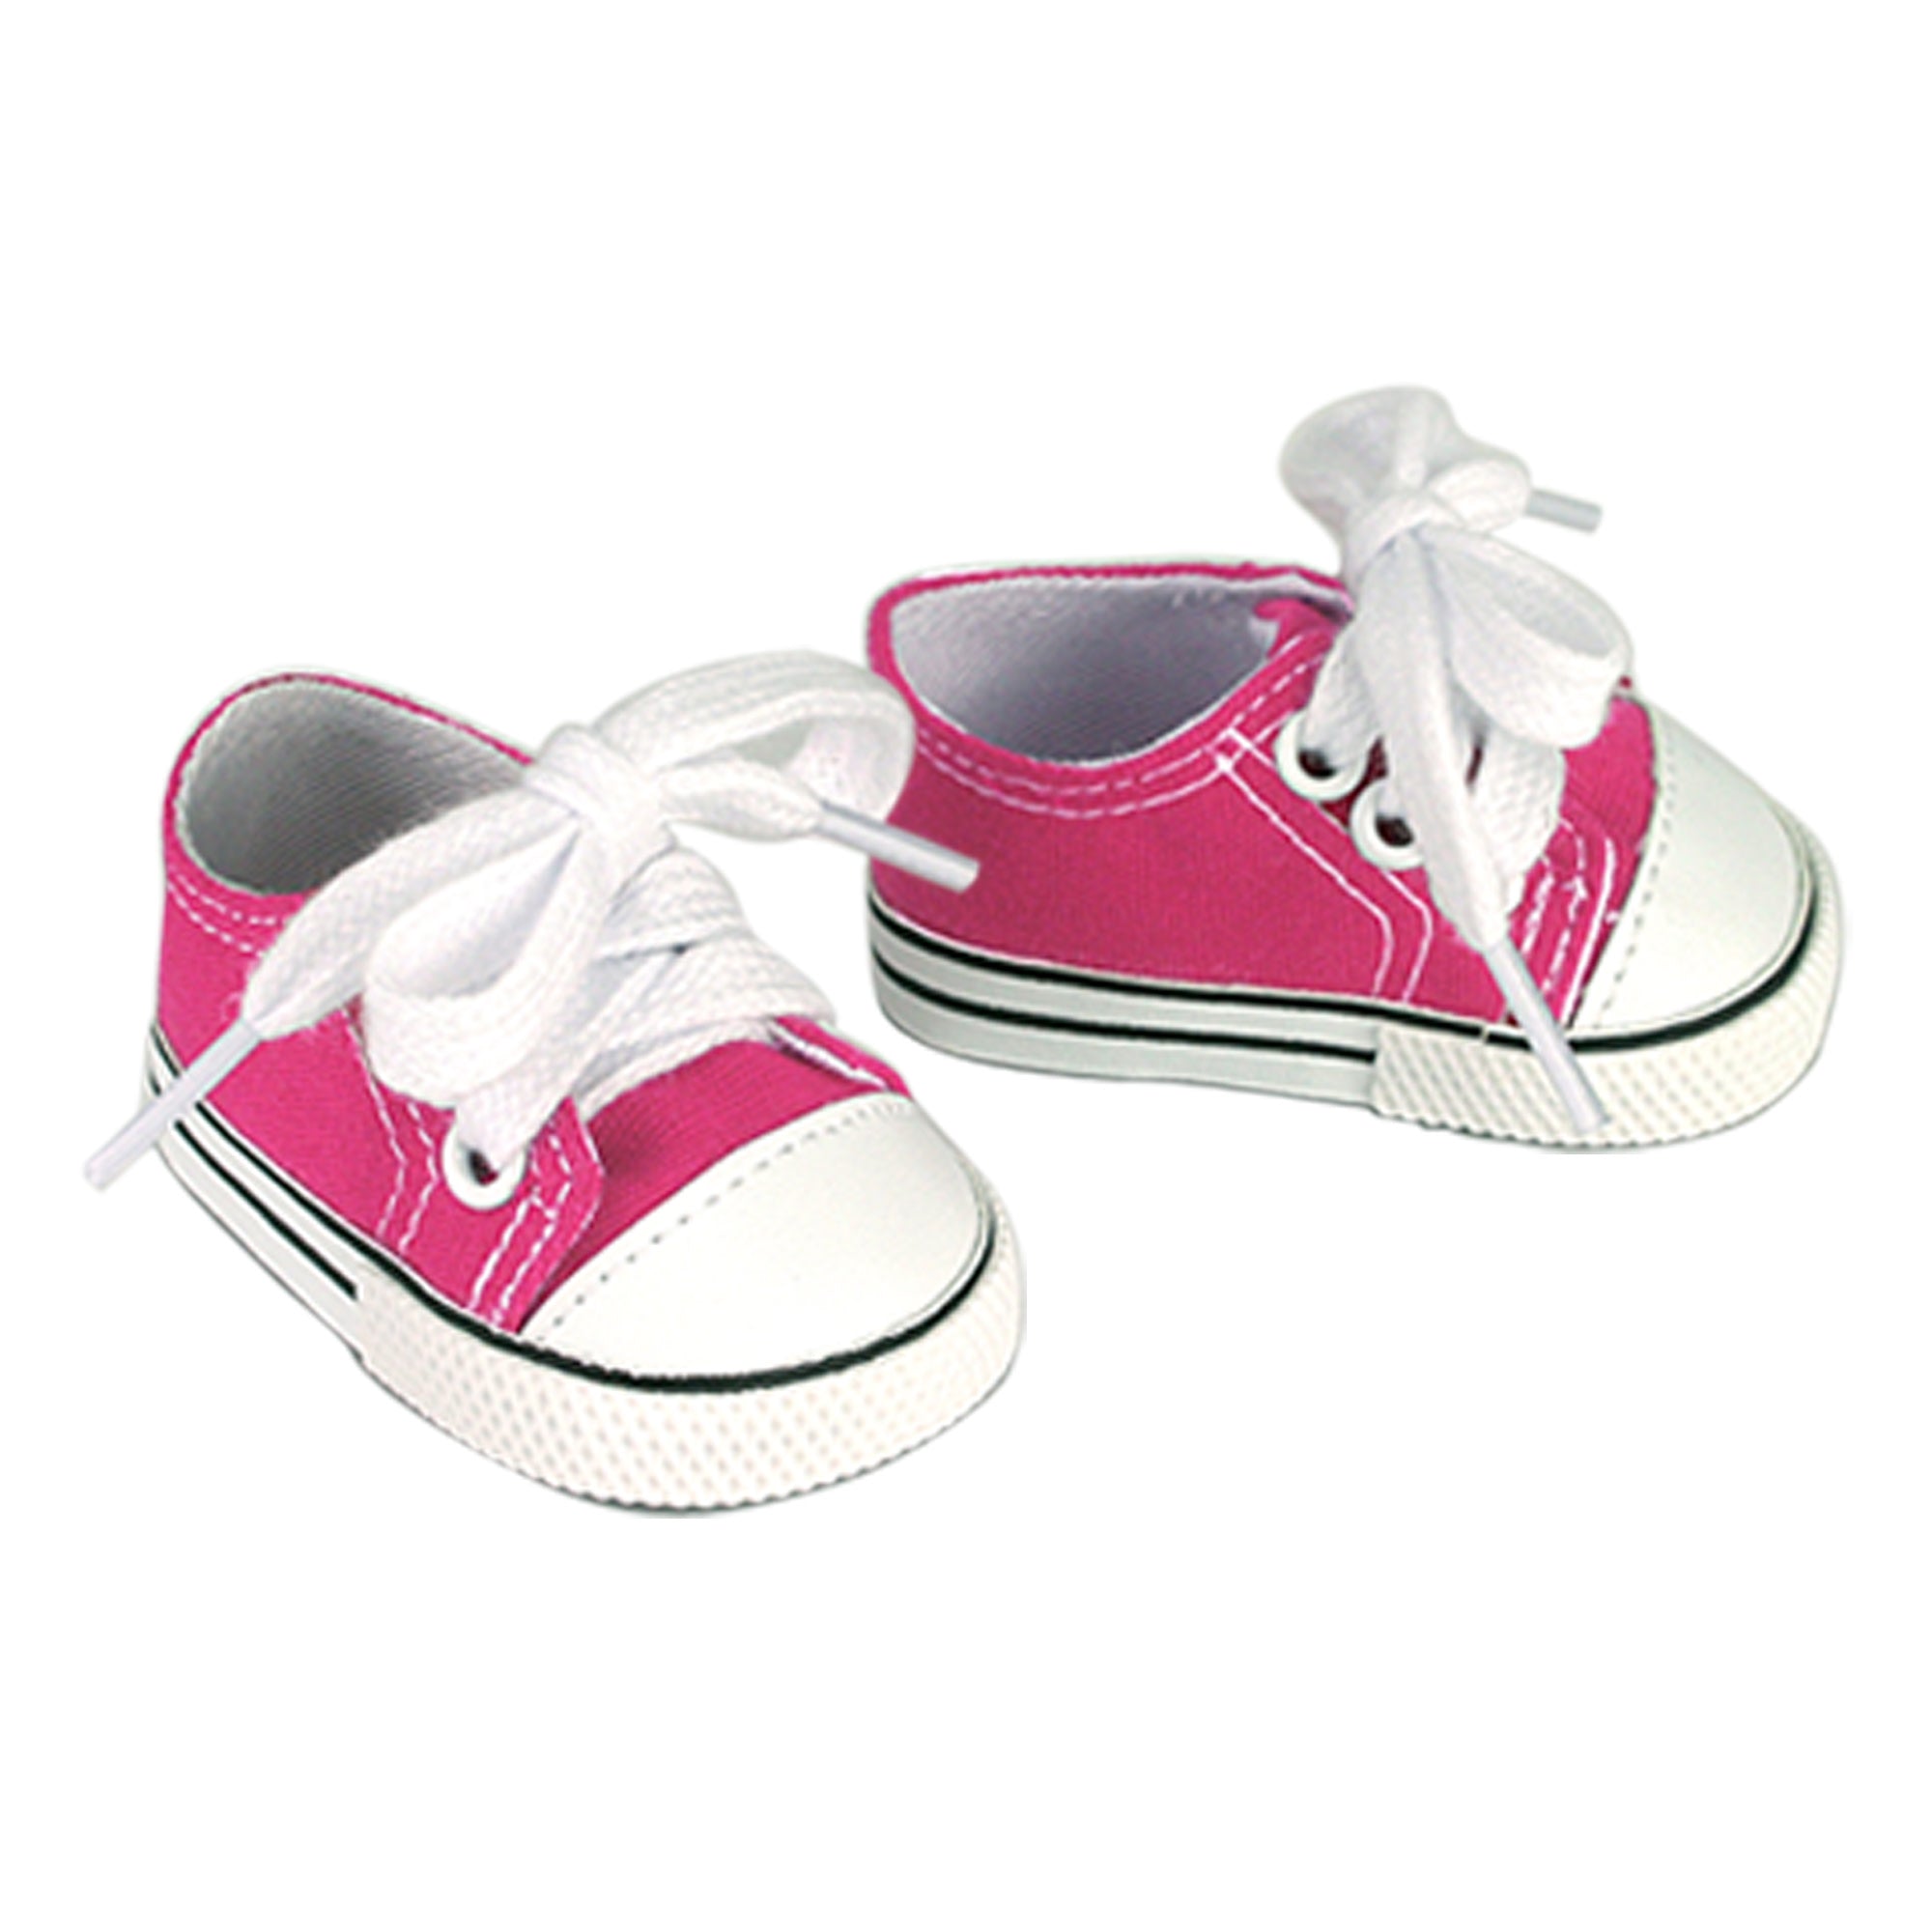 Sophia’s Cute Low-Top Canvas Sneakers for 18” Boy or Girl Dolls, Pink